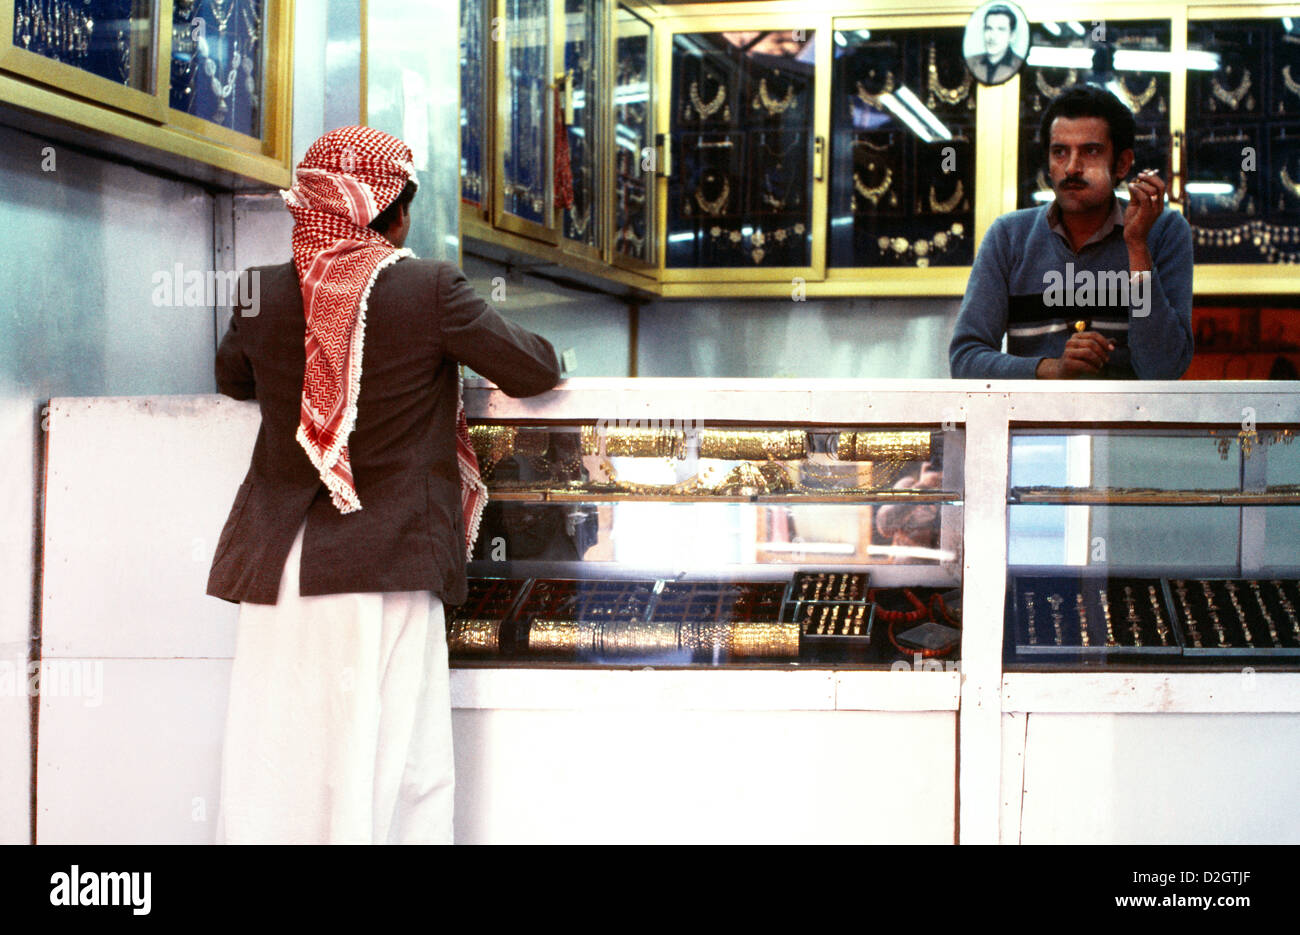 Sanaa Yemen Souk Men In Jewellery Shop Man Behind Counter Chewing Qat Customer wearing red and White Shemagh Stock Photo